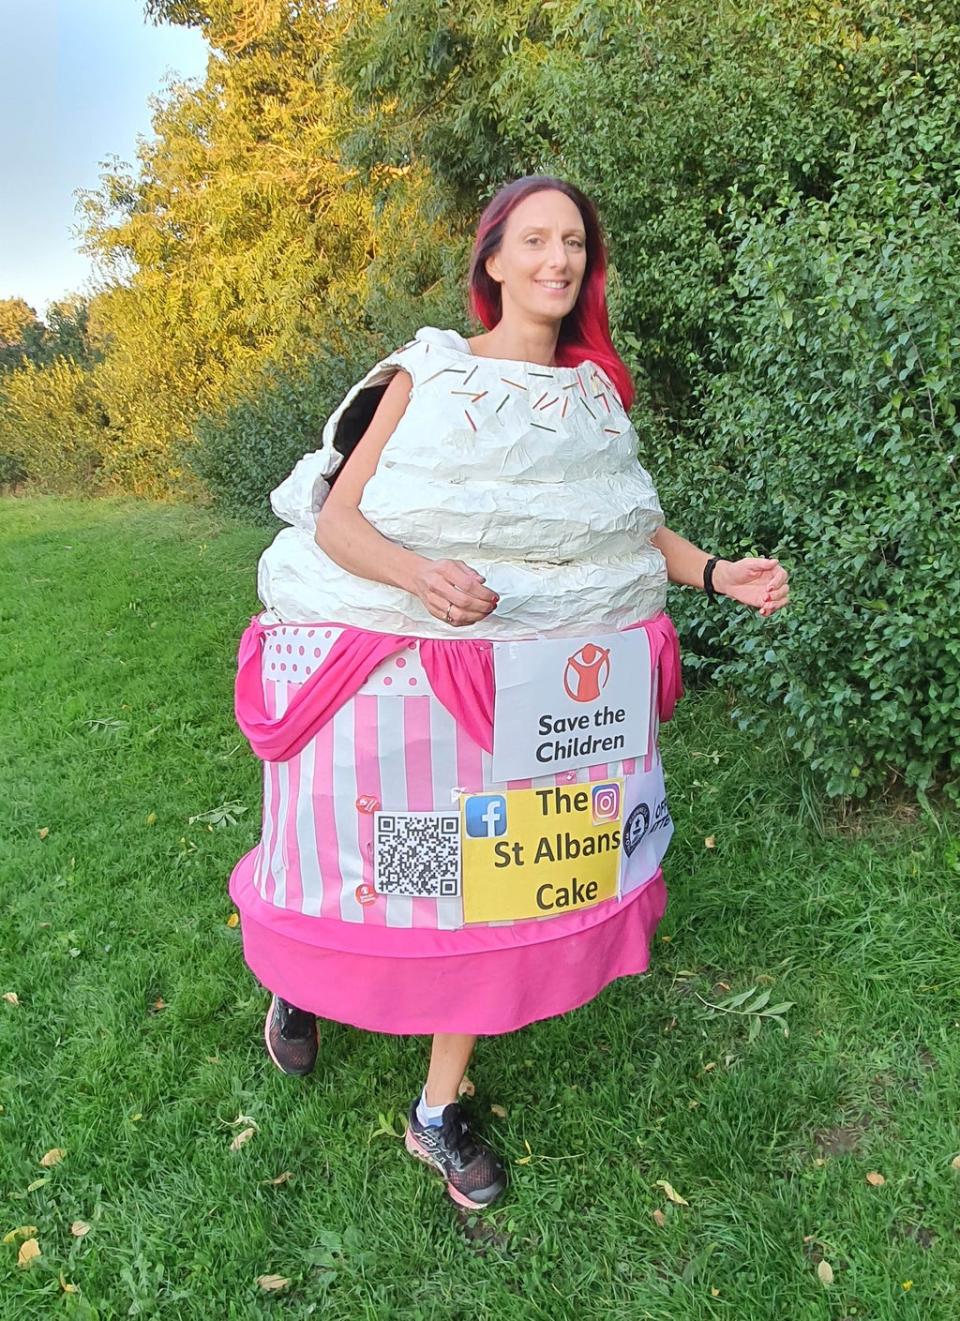 Anna Bassil is hoping to beat the Guinness World Record as fastest woman dressed as a sweet food at the London Marathon (Anna Bassil/PA) (PA Media)